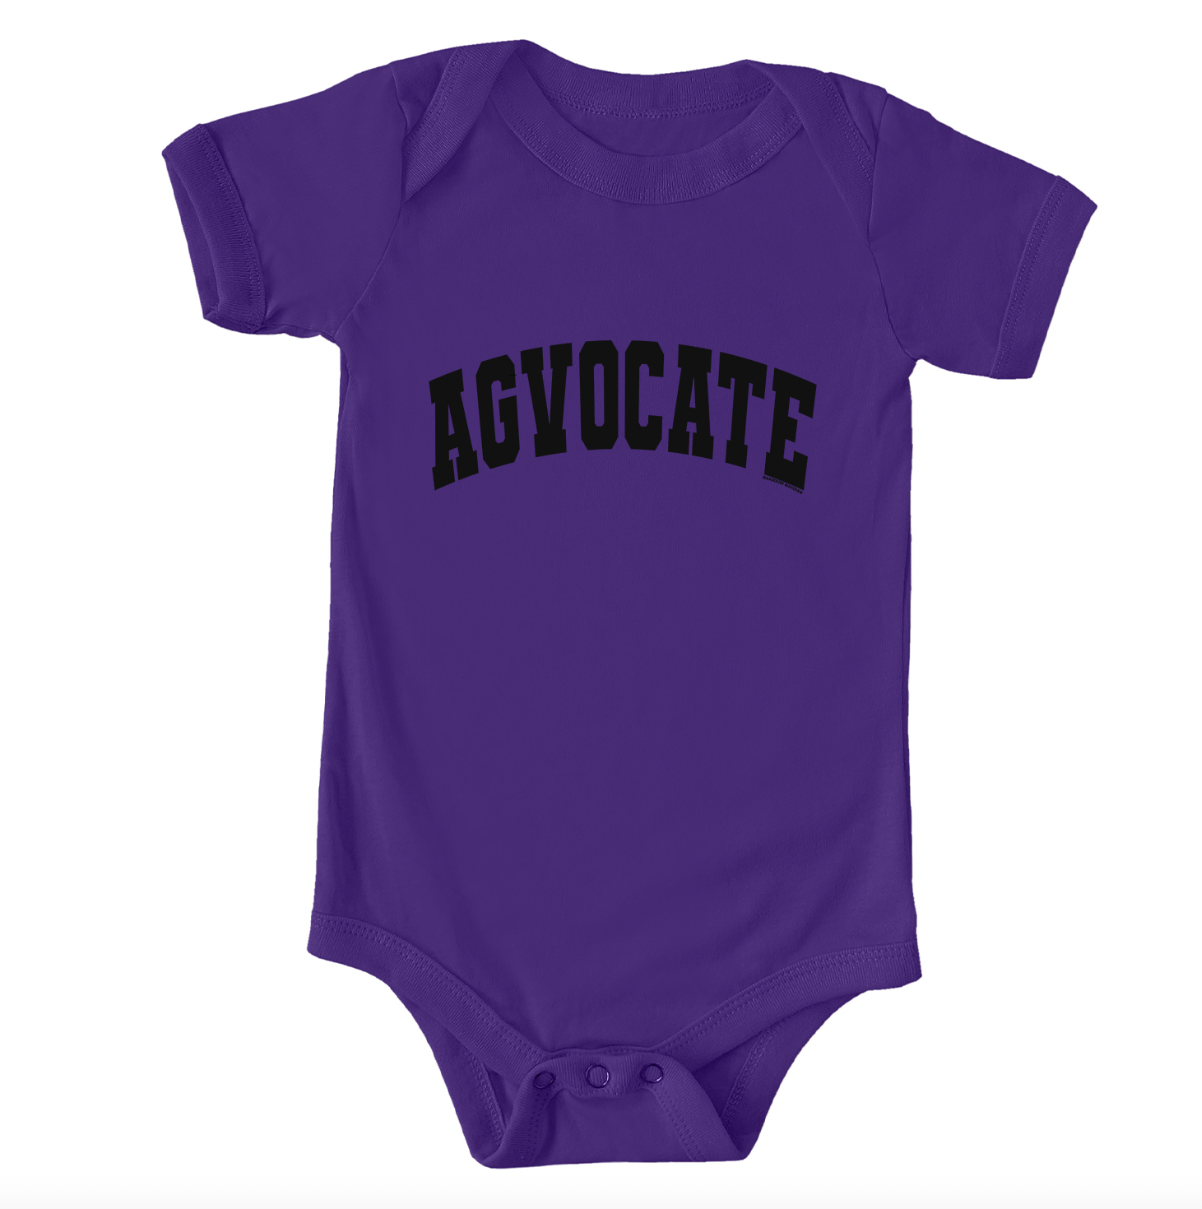 Varsity Agvocate One Piece/T-Shirt (Newborn - Youth XL) - Multiple Colors!